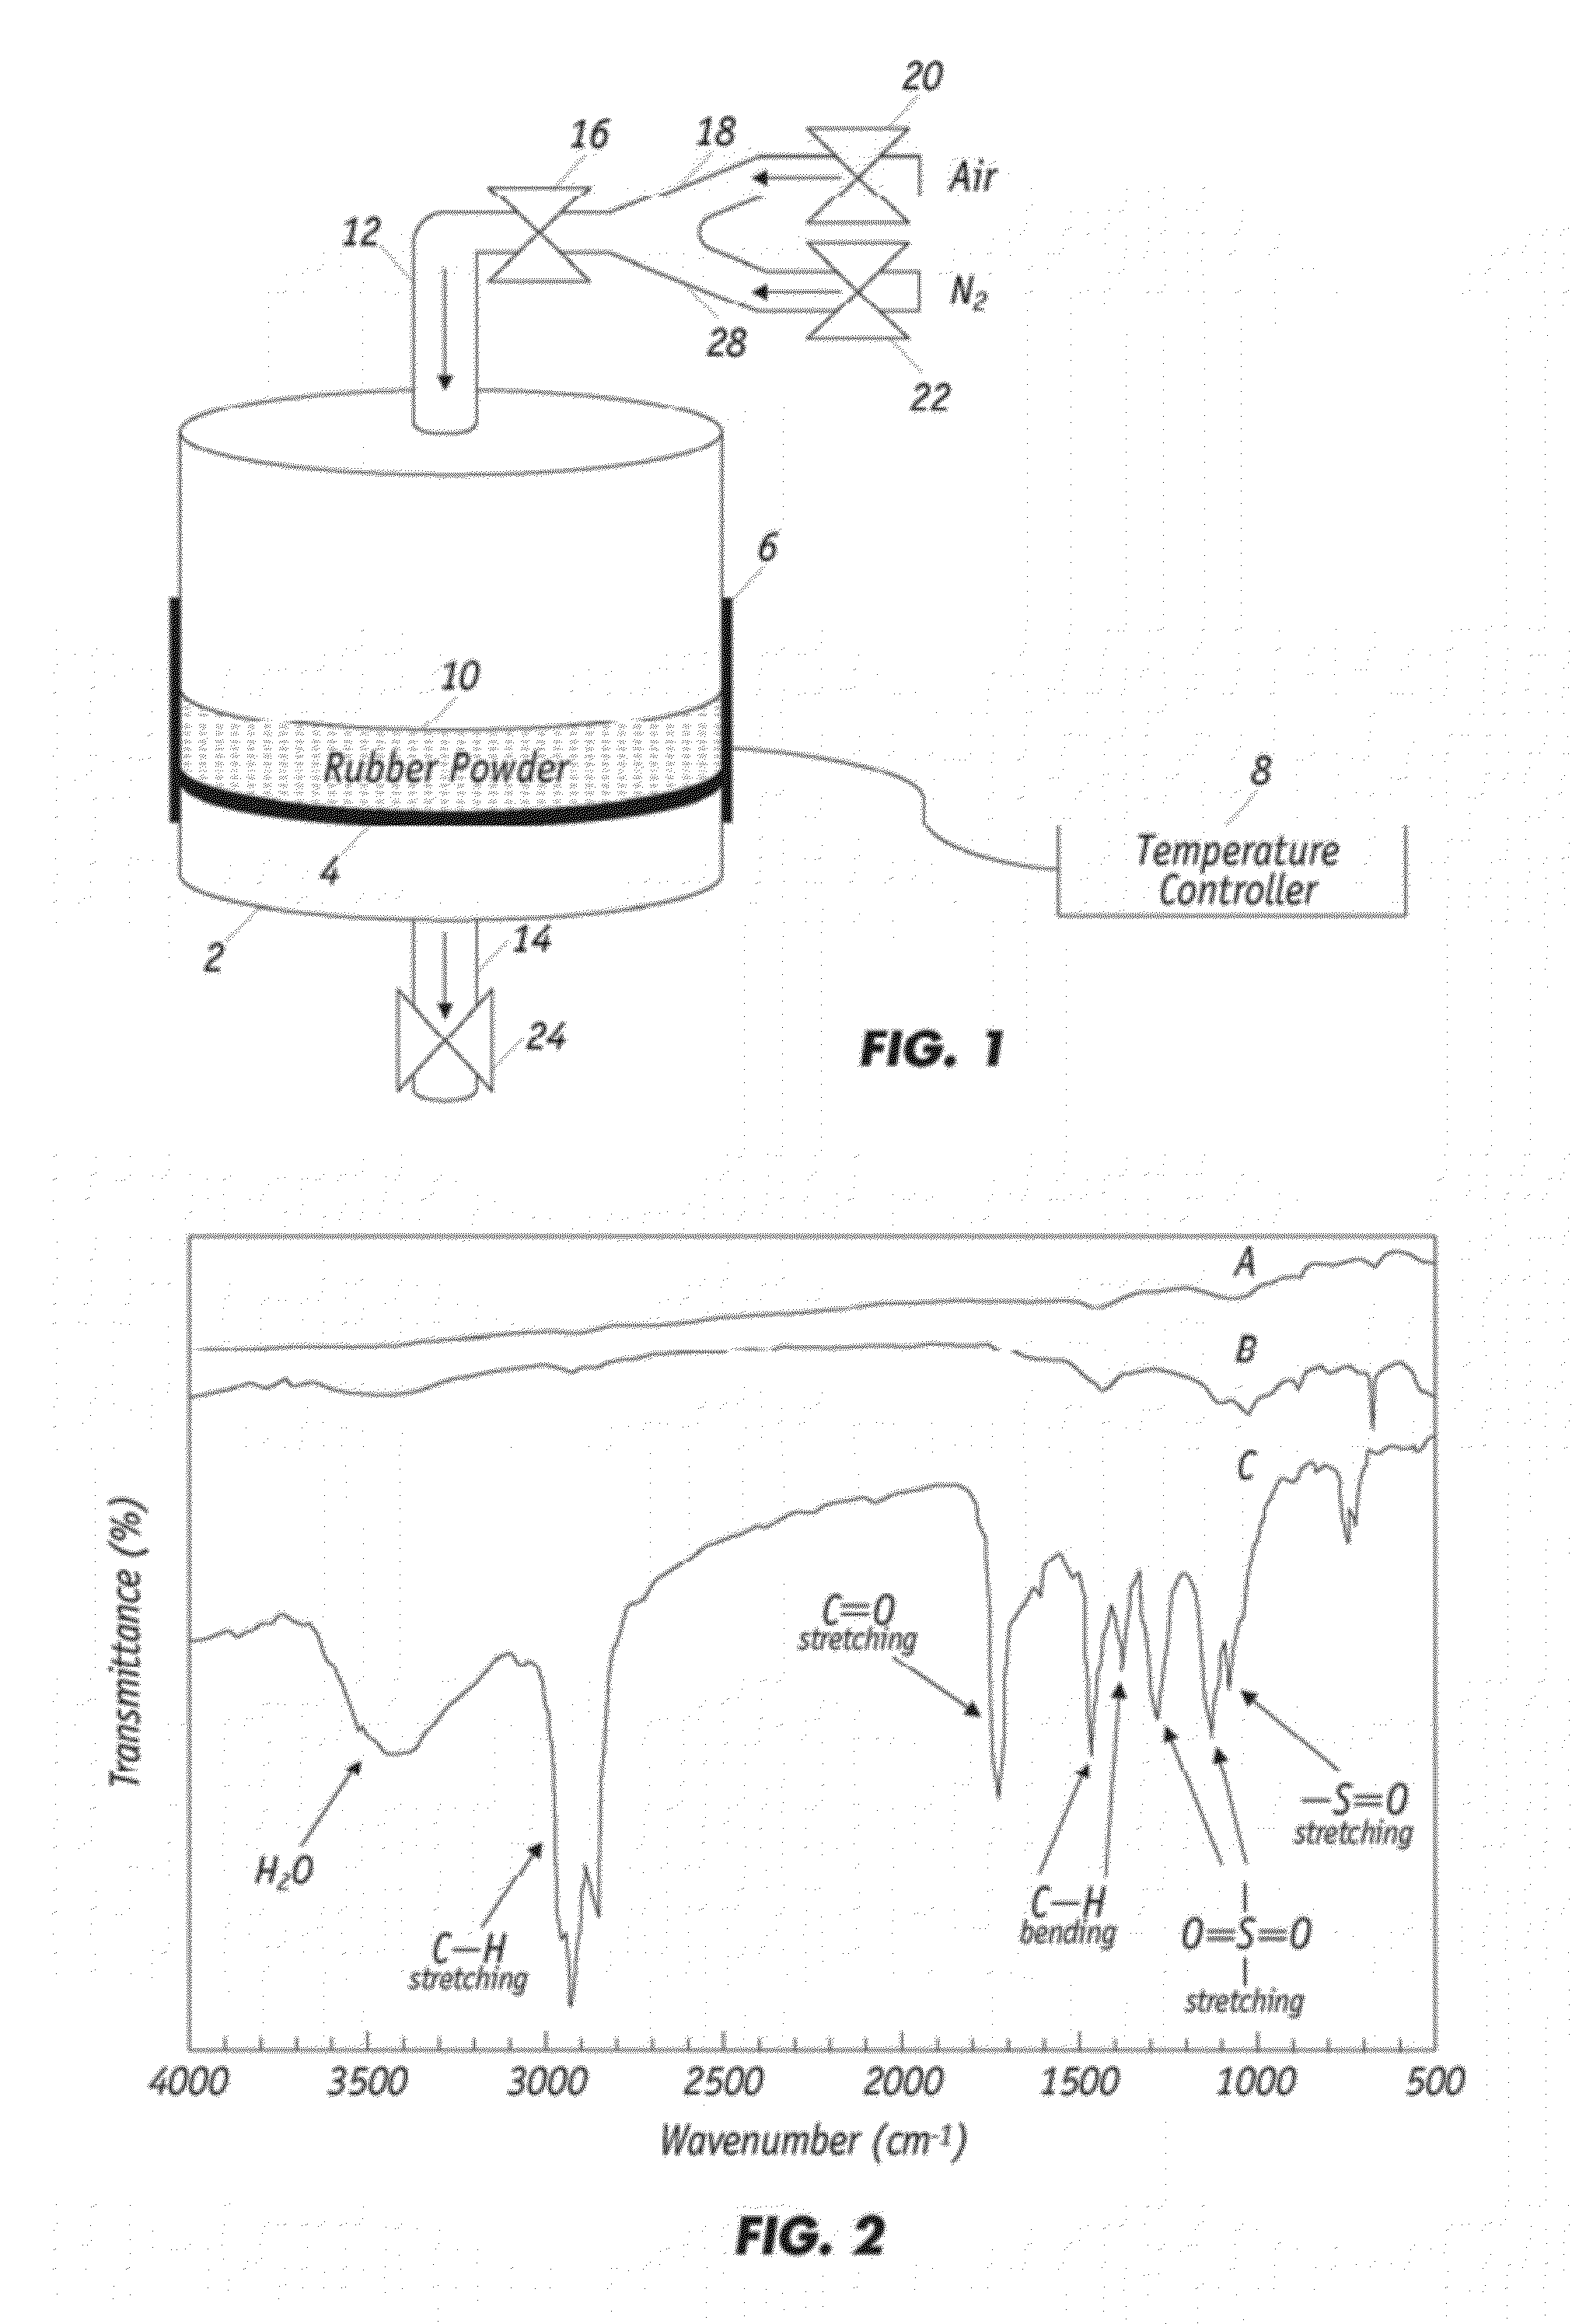 Method for Producing Improved Rubberized Concrete using Waste Rubber Tires